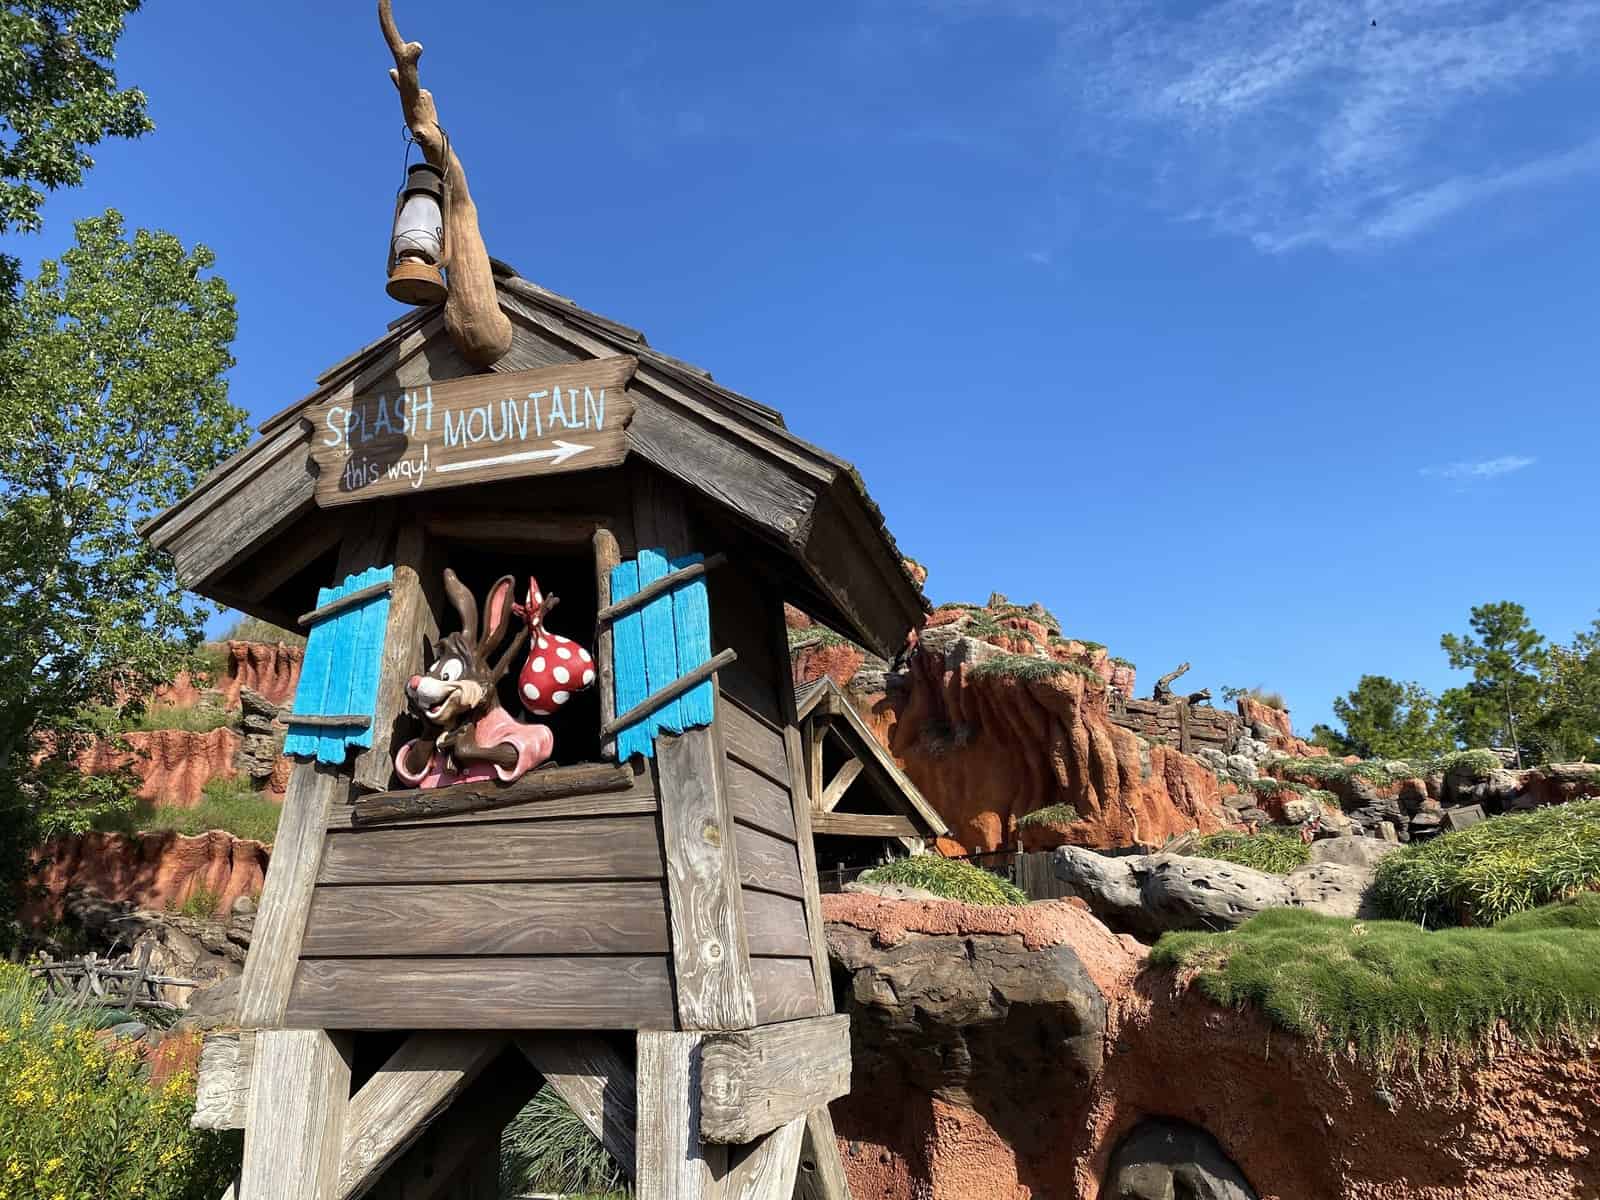 Splash Mountain (facts, history, & a necessary update)